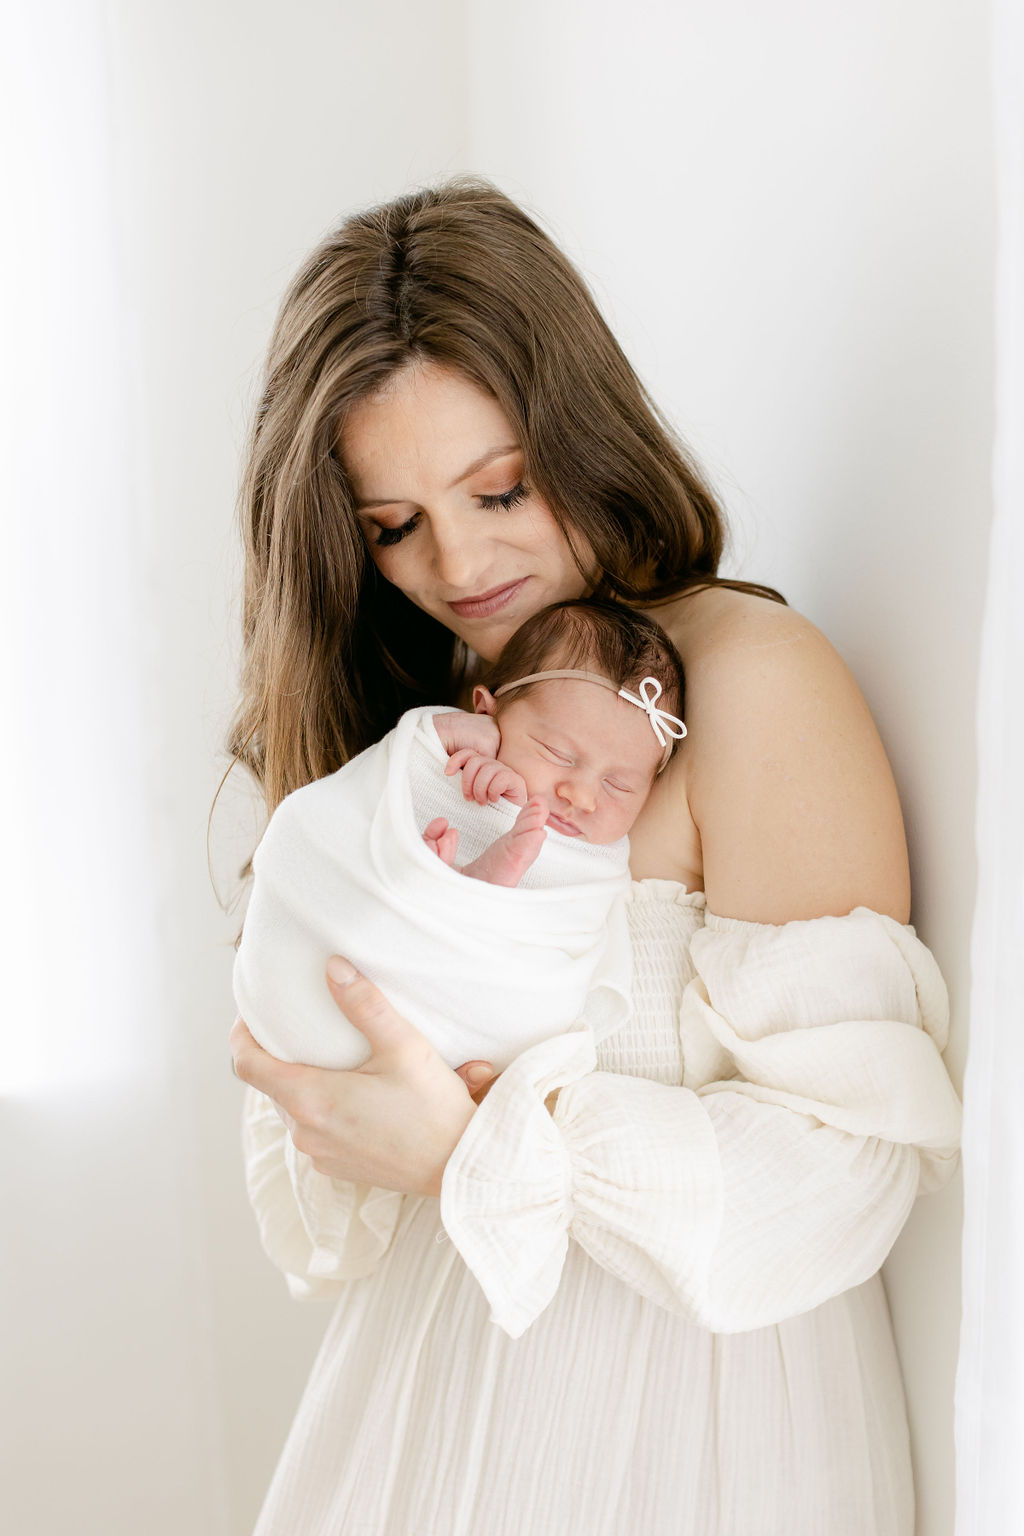 A happy mother cradles her sleeping newborn baby against her chest while leaning against a wall in a studio before meeting pediatricians mount pleasant sc